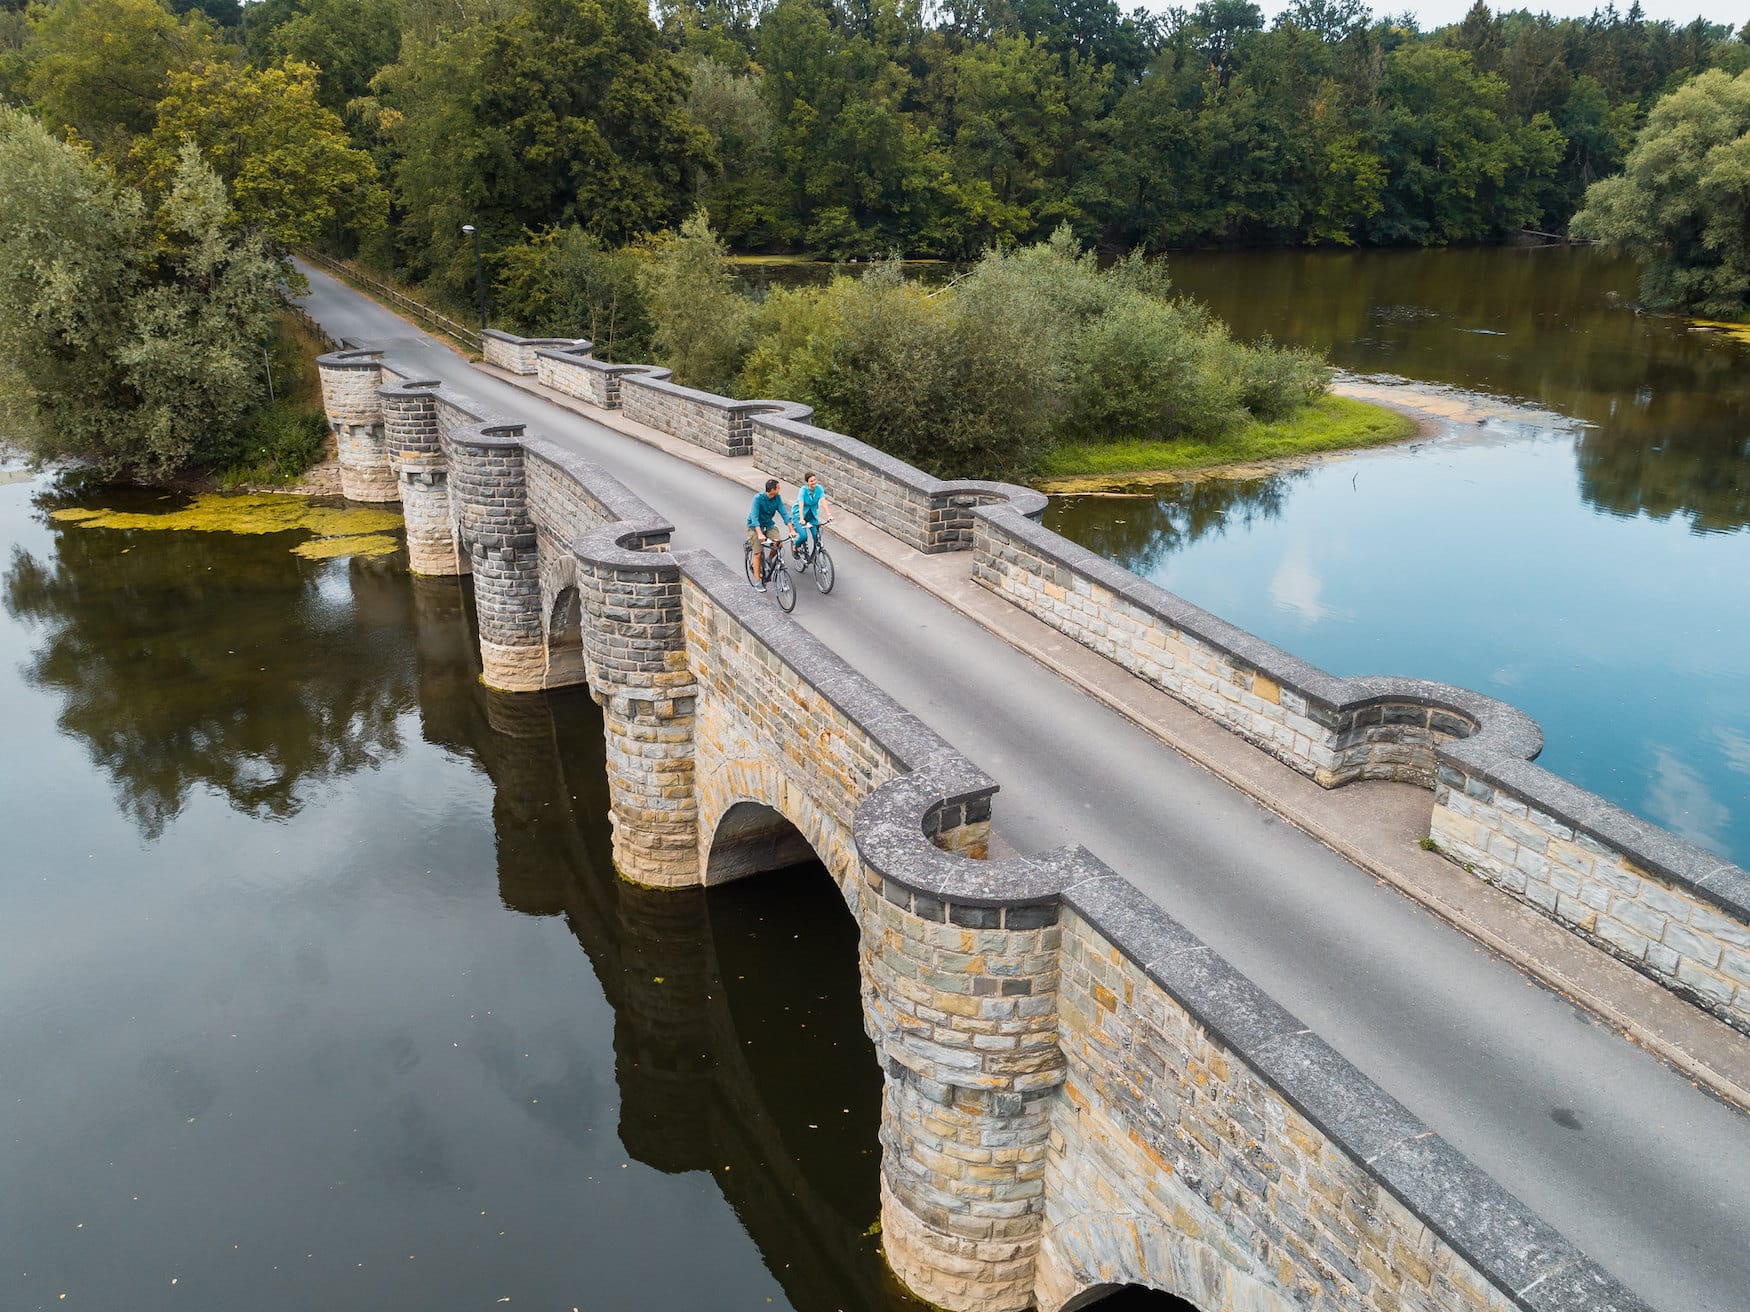 Woman and man cycling over bridge in Sauerland region, Western Germany